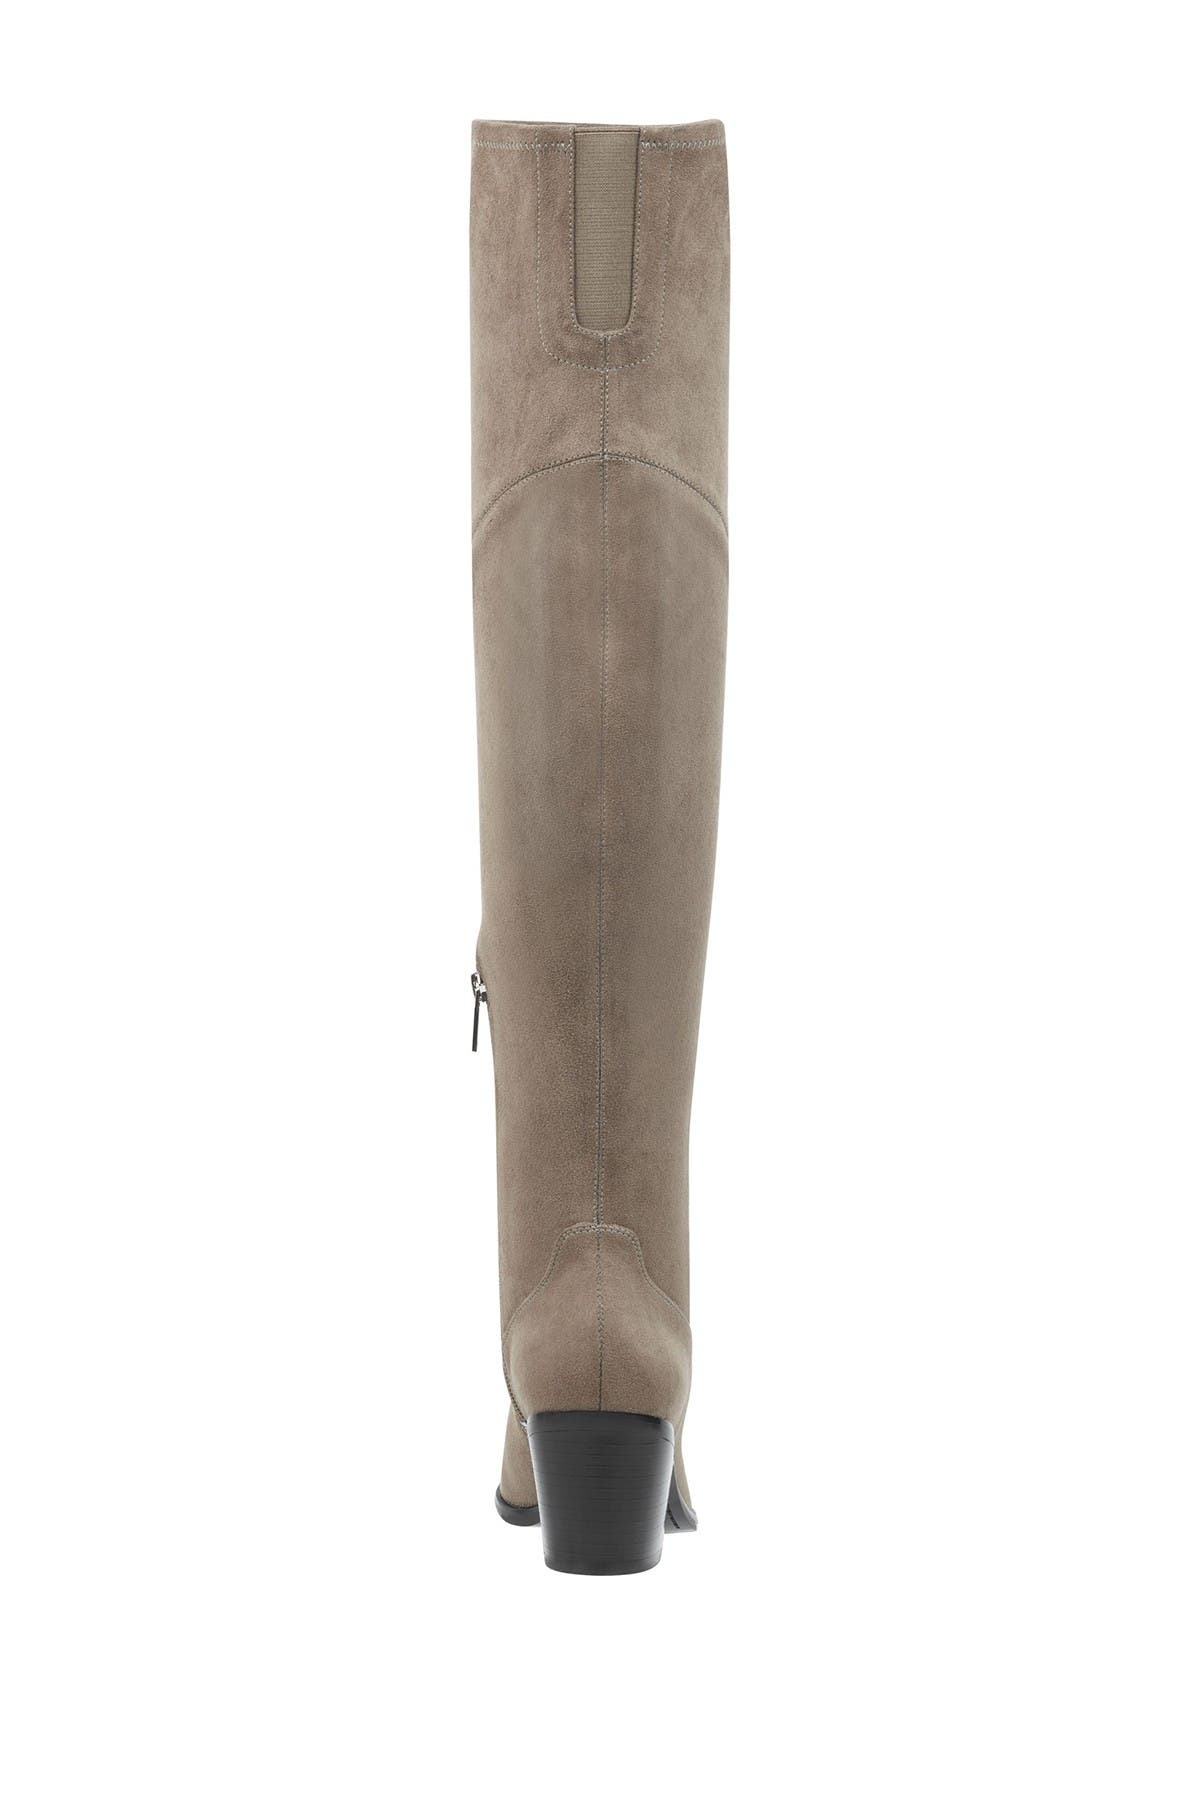 marc fisher rossa over the knee boot